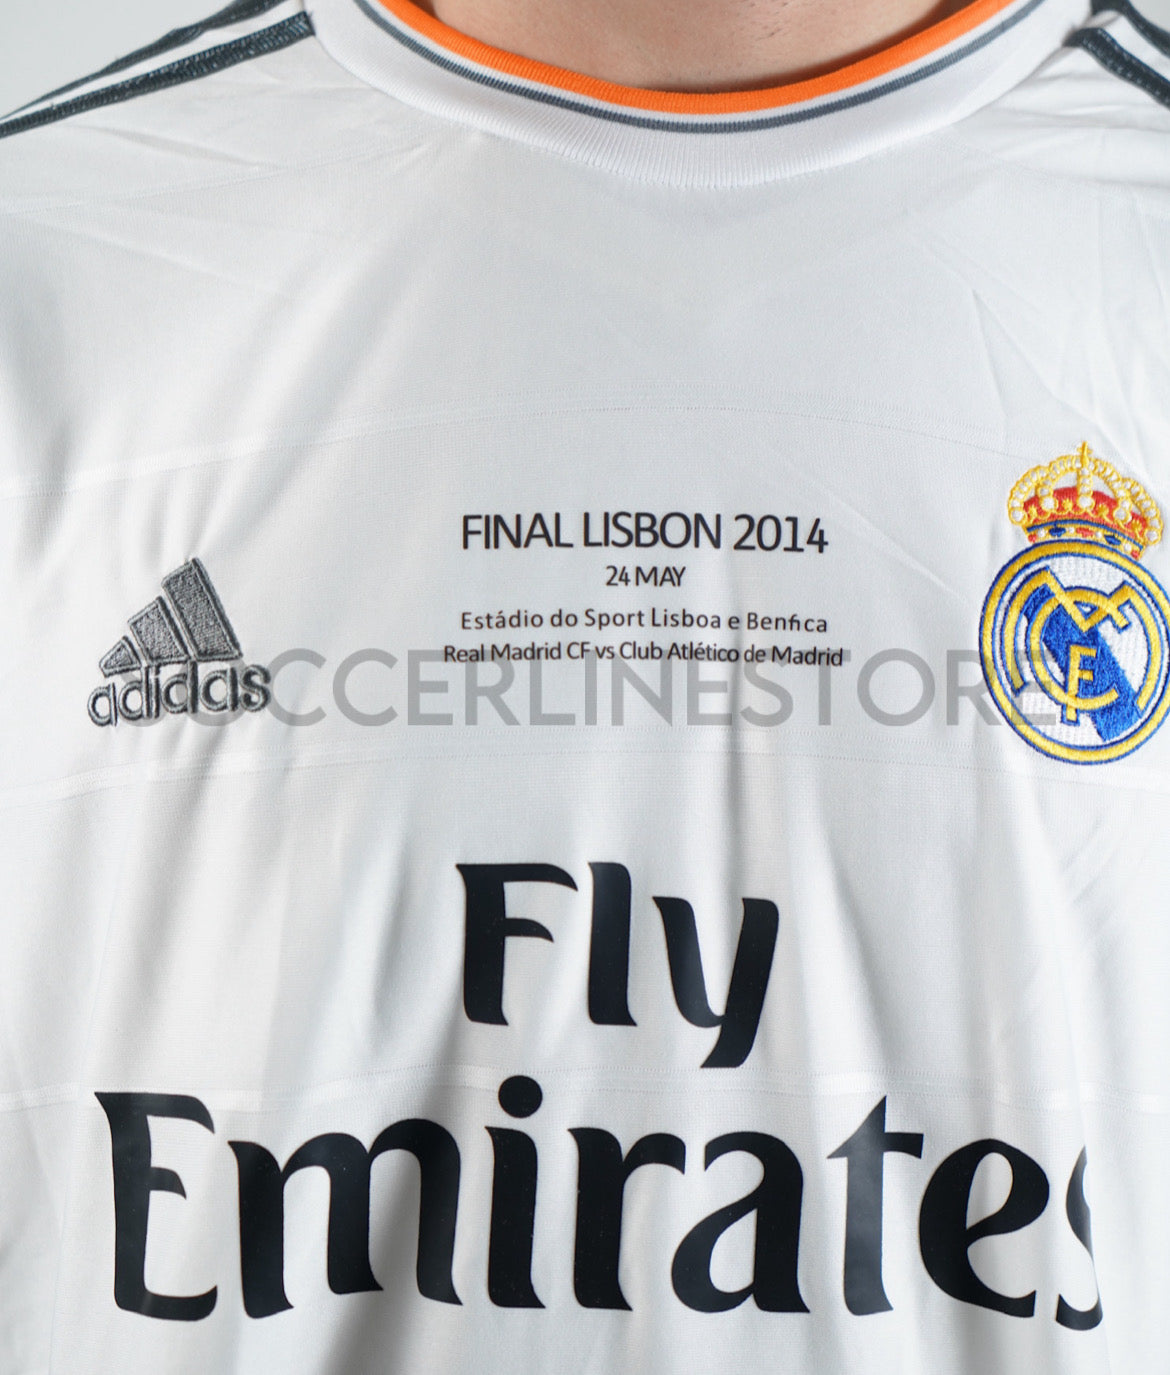 Real Madrid 2013/2014 Champions League Final